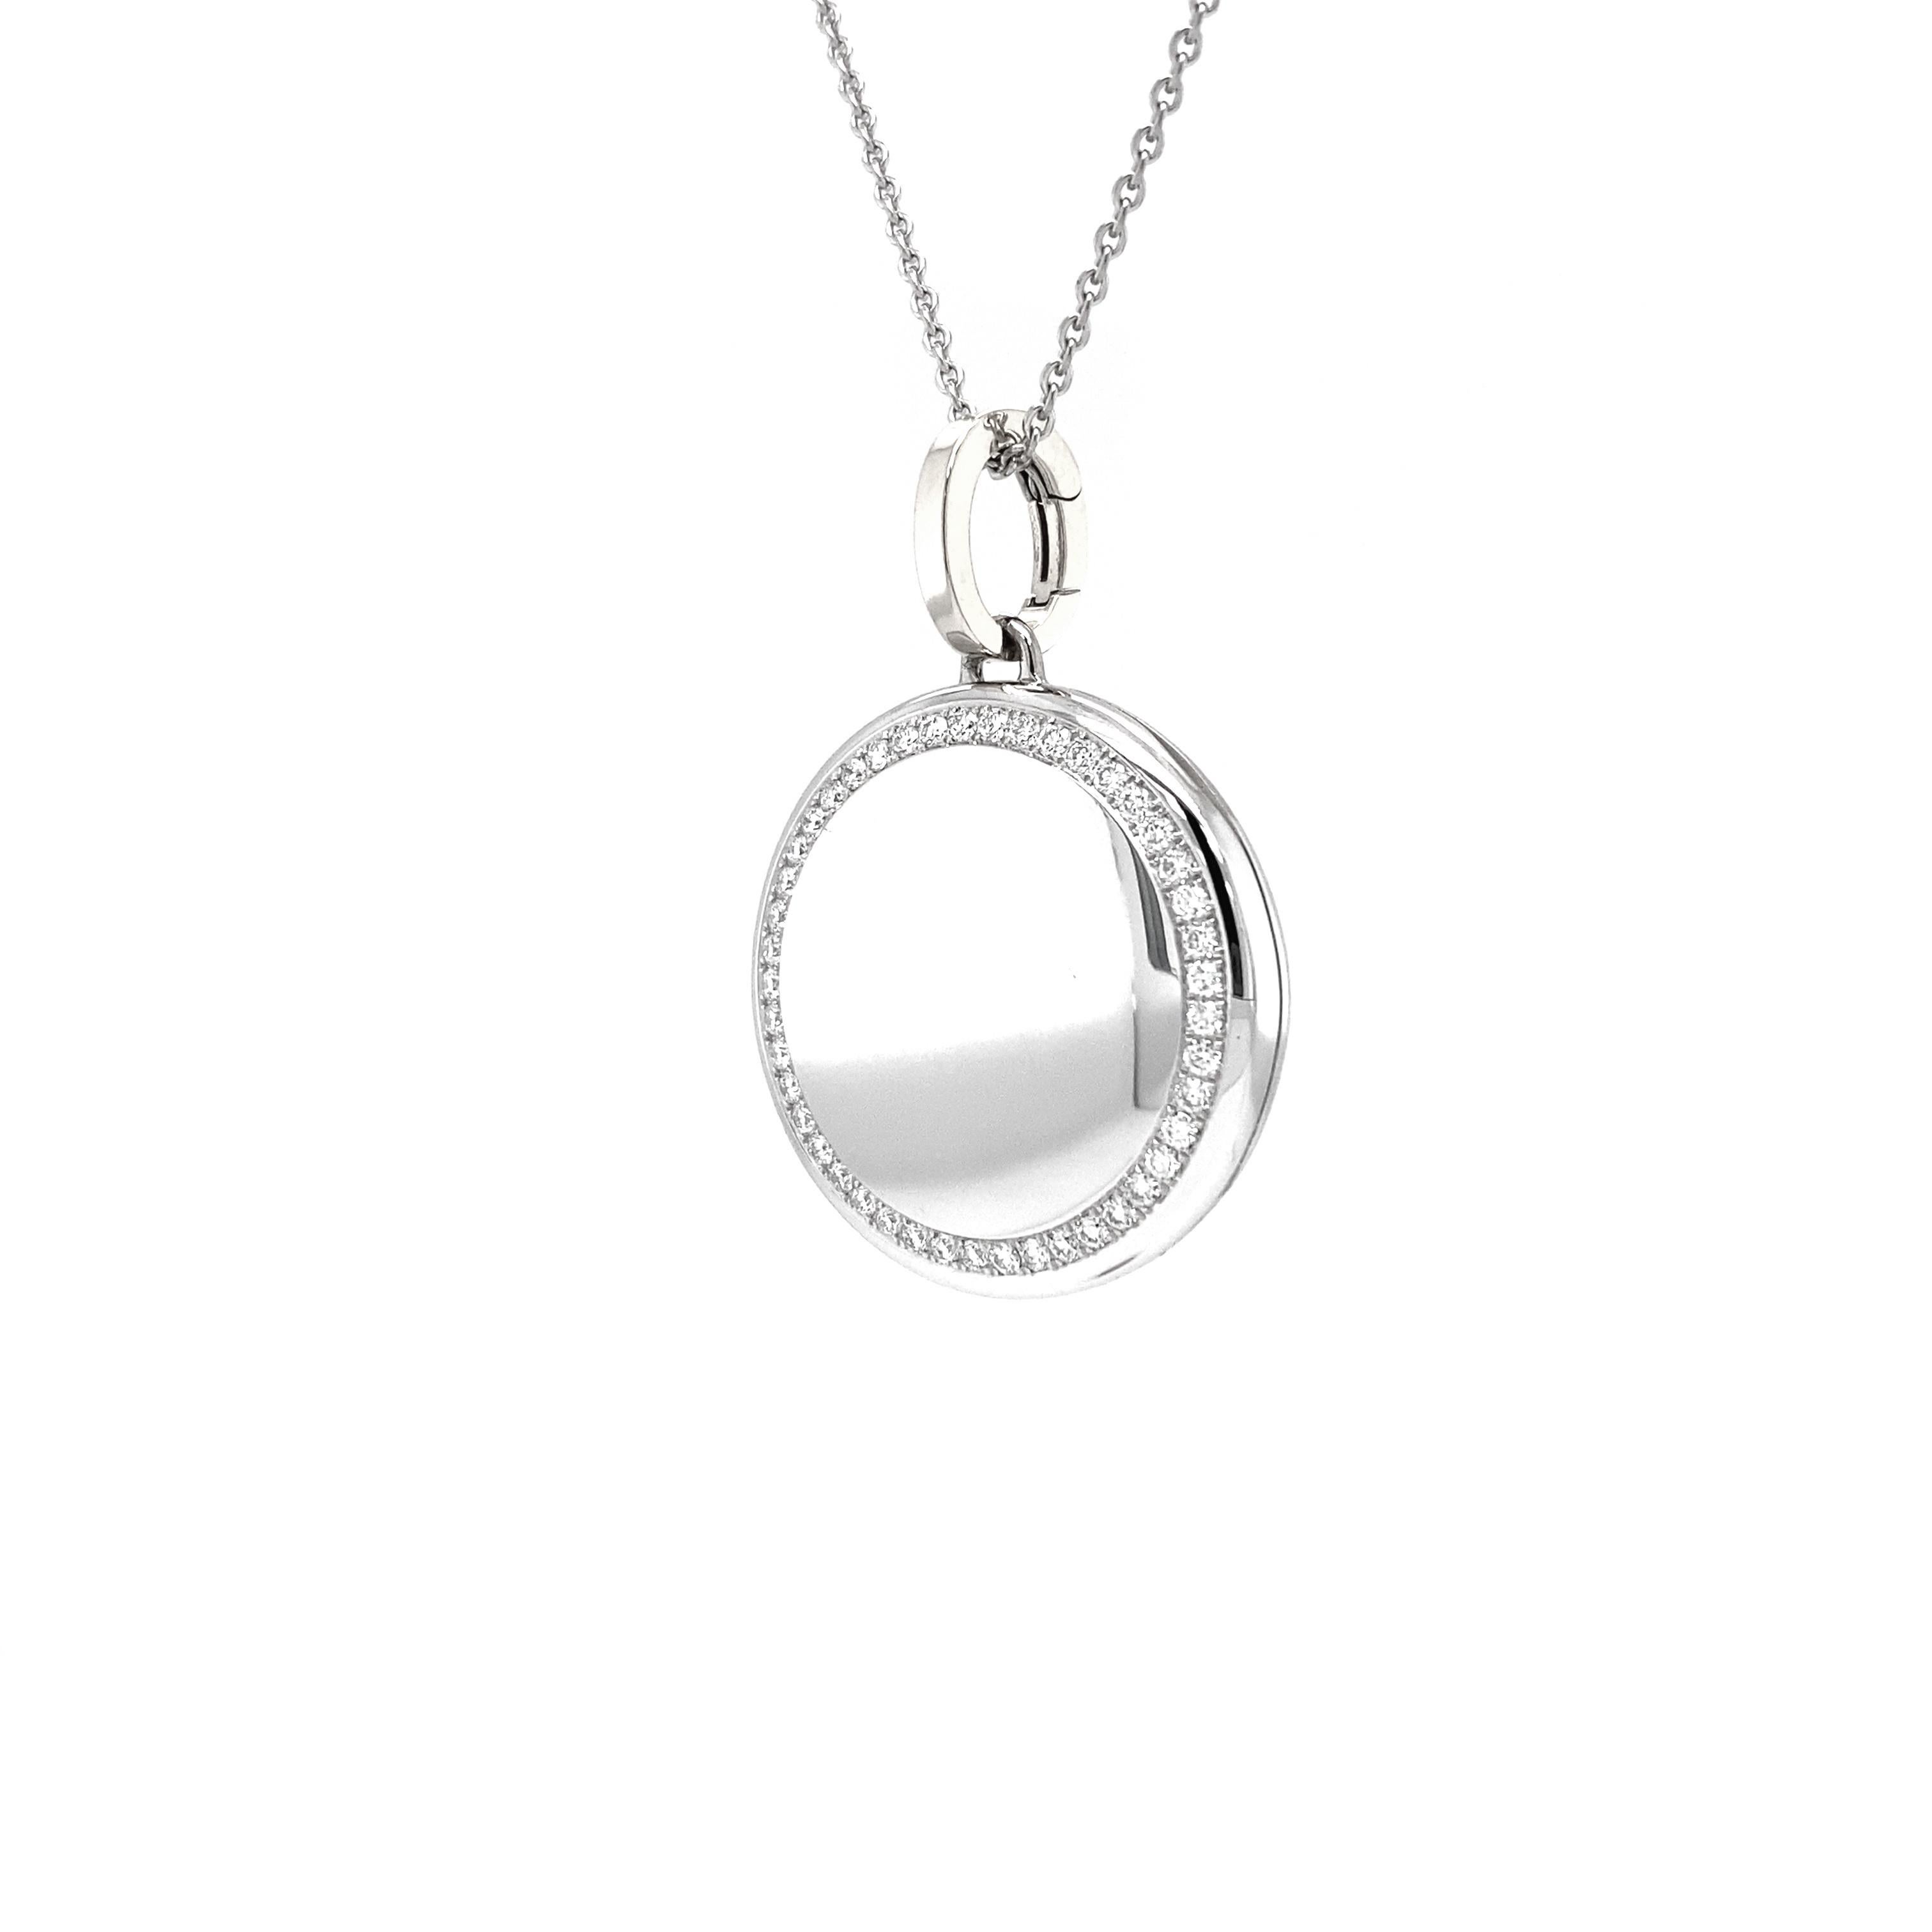 Victor Mayer round locket pendant 18k white gold, Hallmark collection, 45 diamonds, total 0.54 ct, H VS, diameter app. 26.0 mm

About the creator Victor Mayer
Victor Mayer is internationally renowned for elegant timeless designs and unrivalled